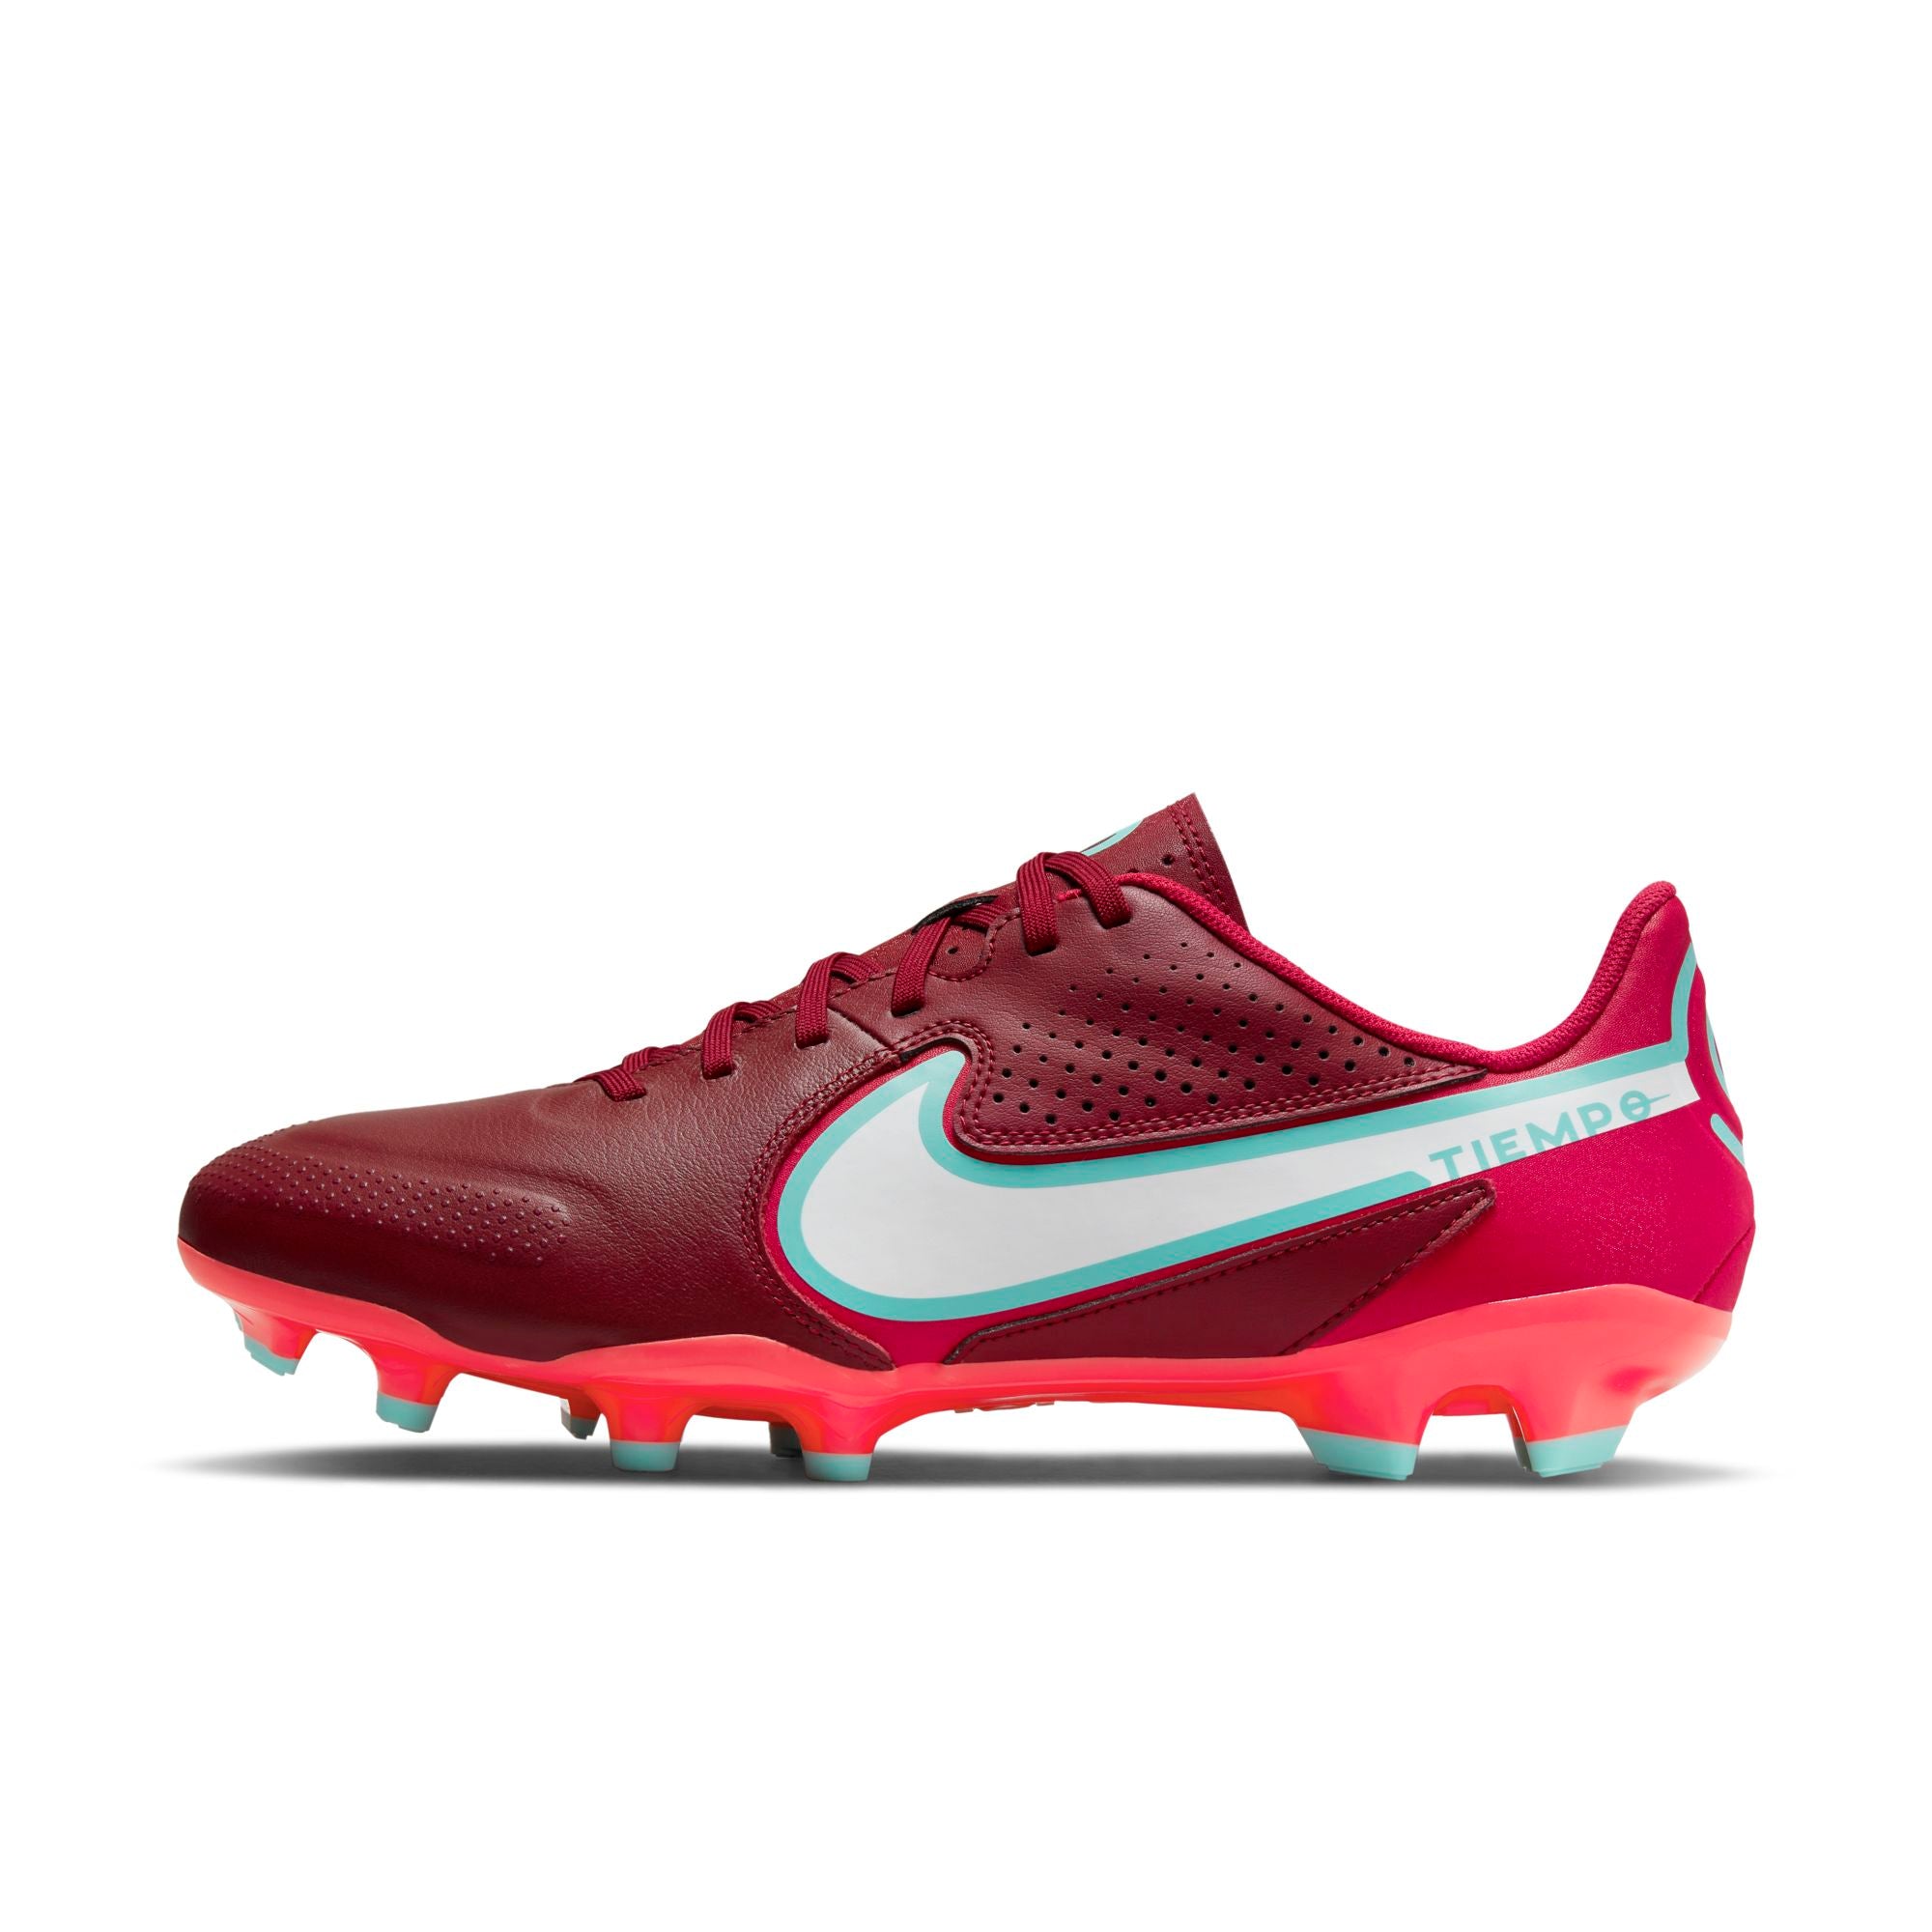 Nike Legend 9 Academy MG Multi-Ground Soccer Cleats